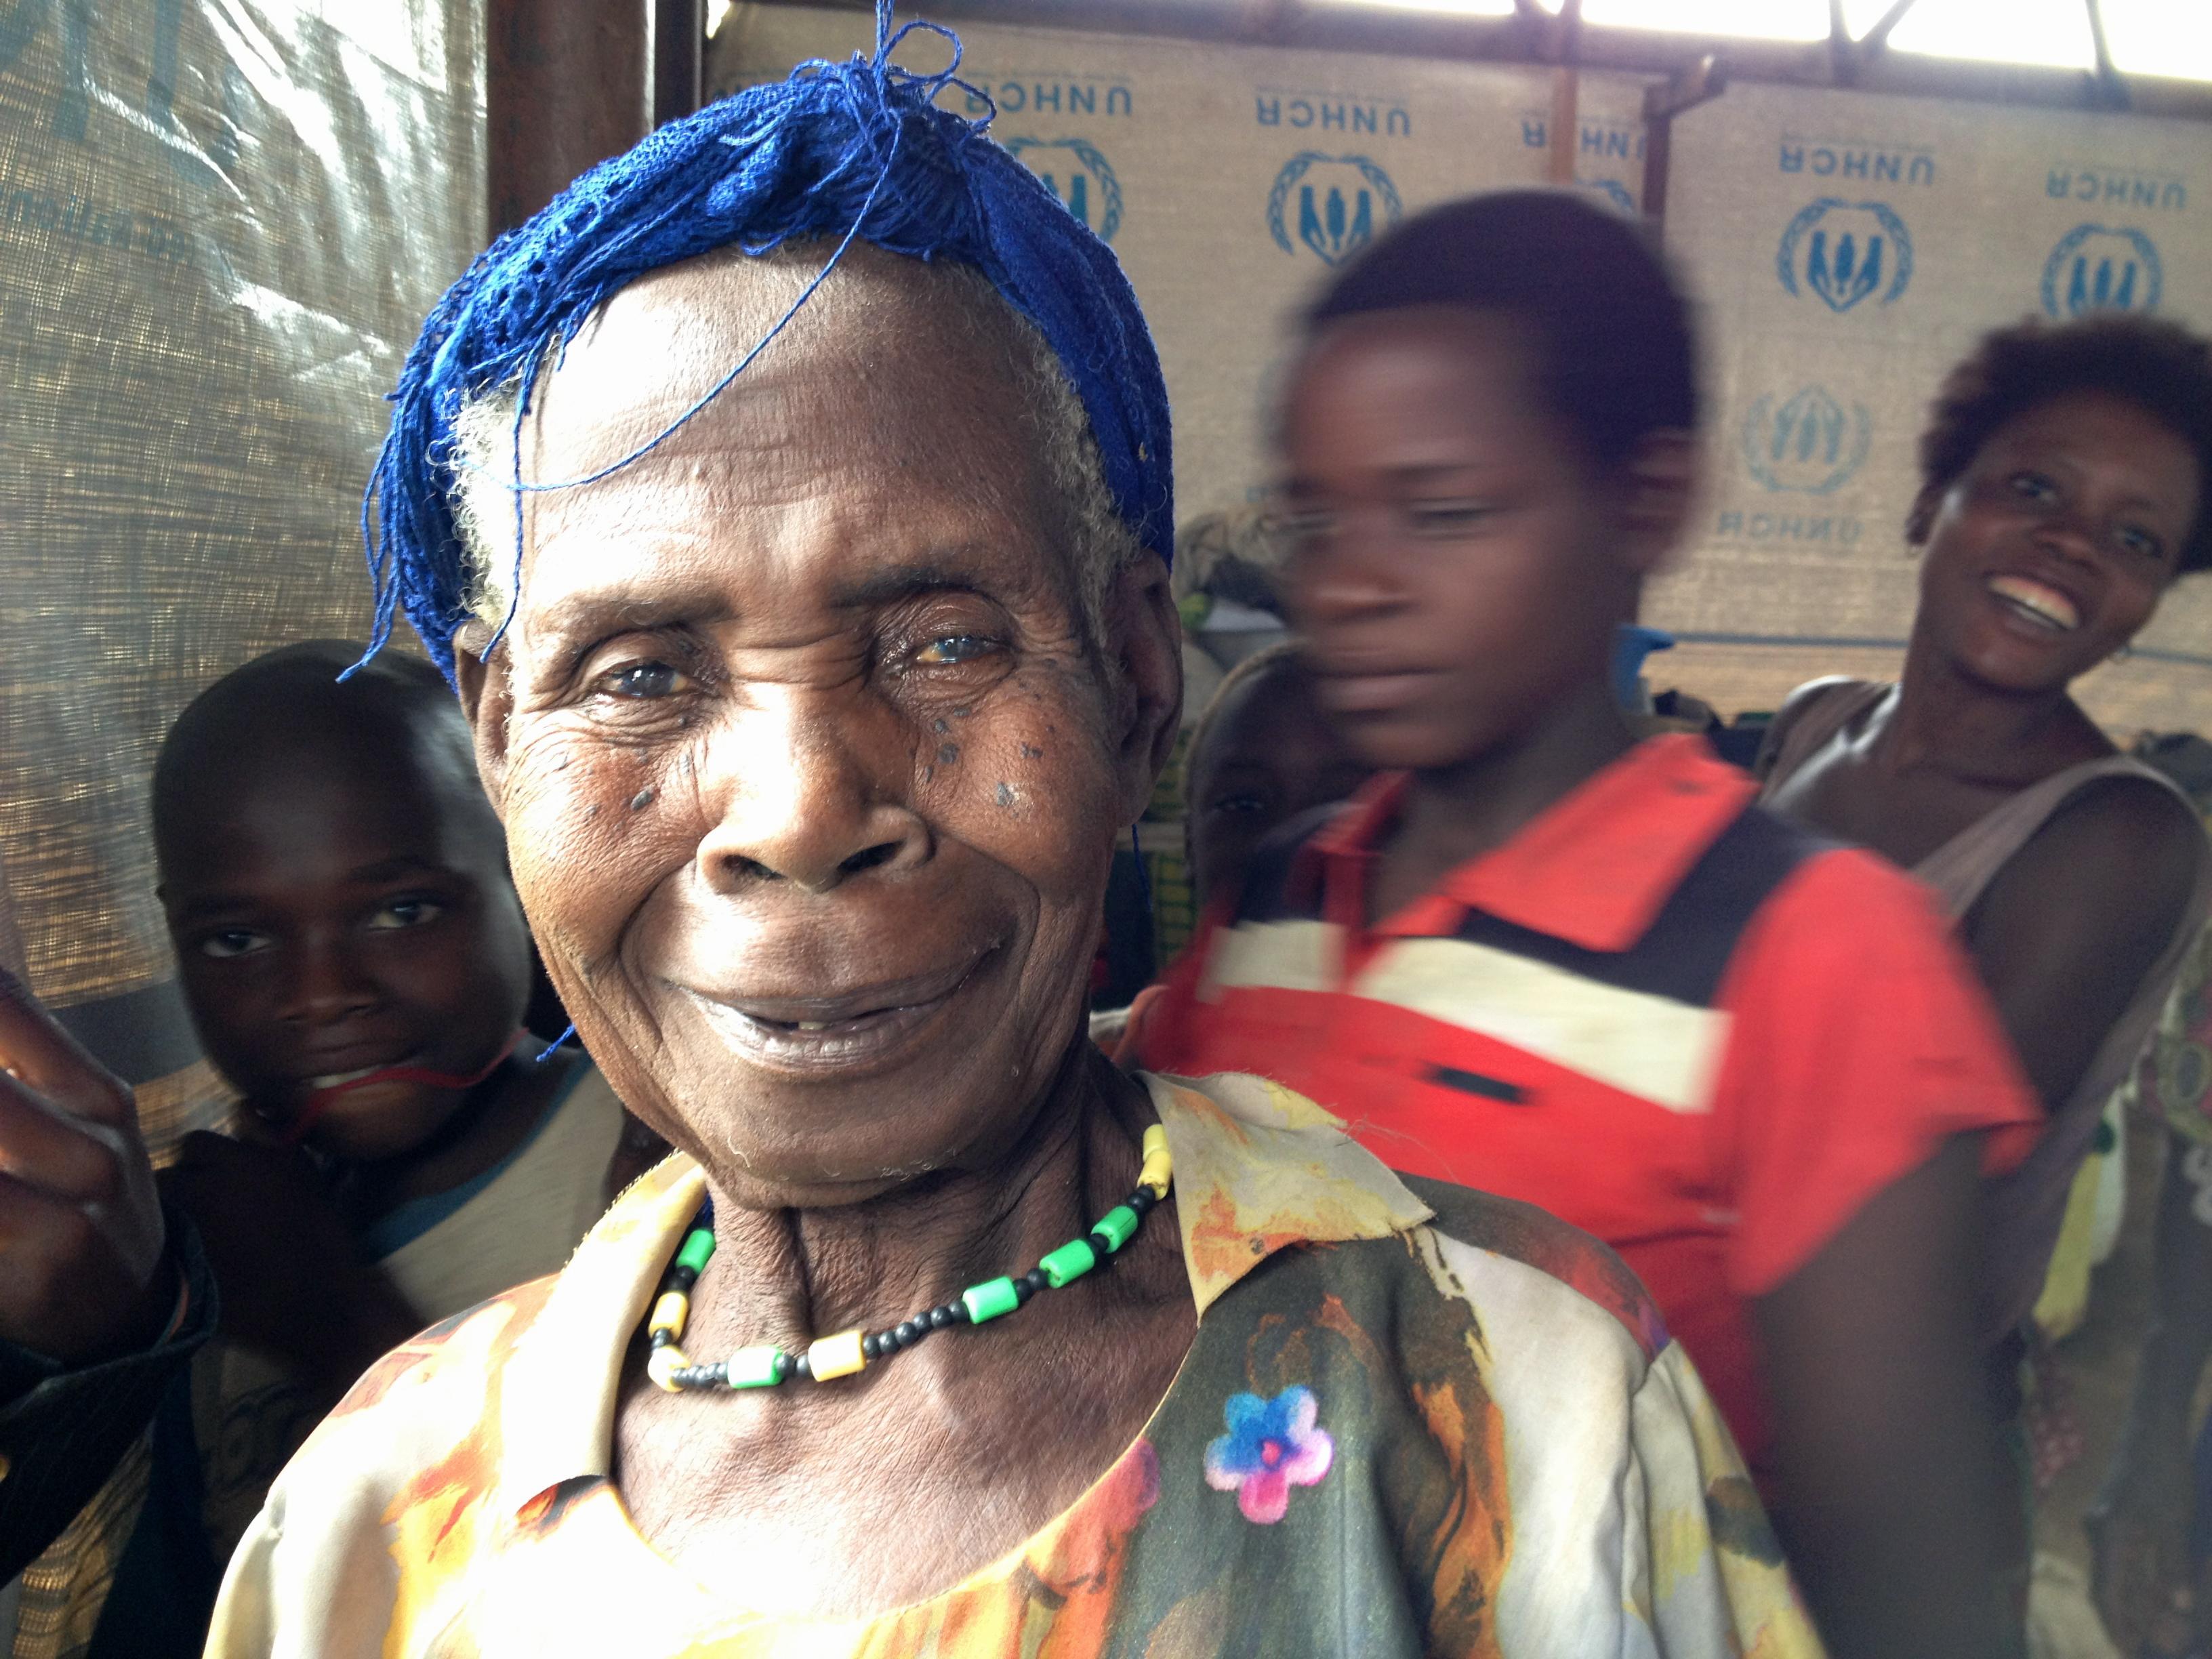 Most DRC refugees in camps southwestern Uganda are women and children. Photo: ACT/DCA/Mai Gad